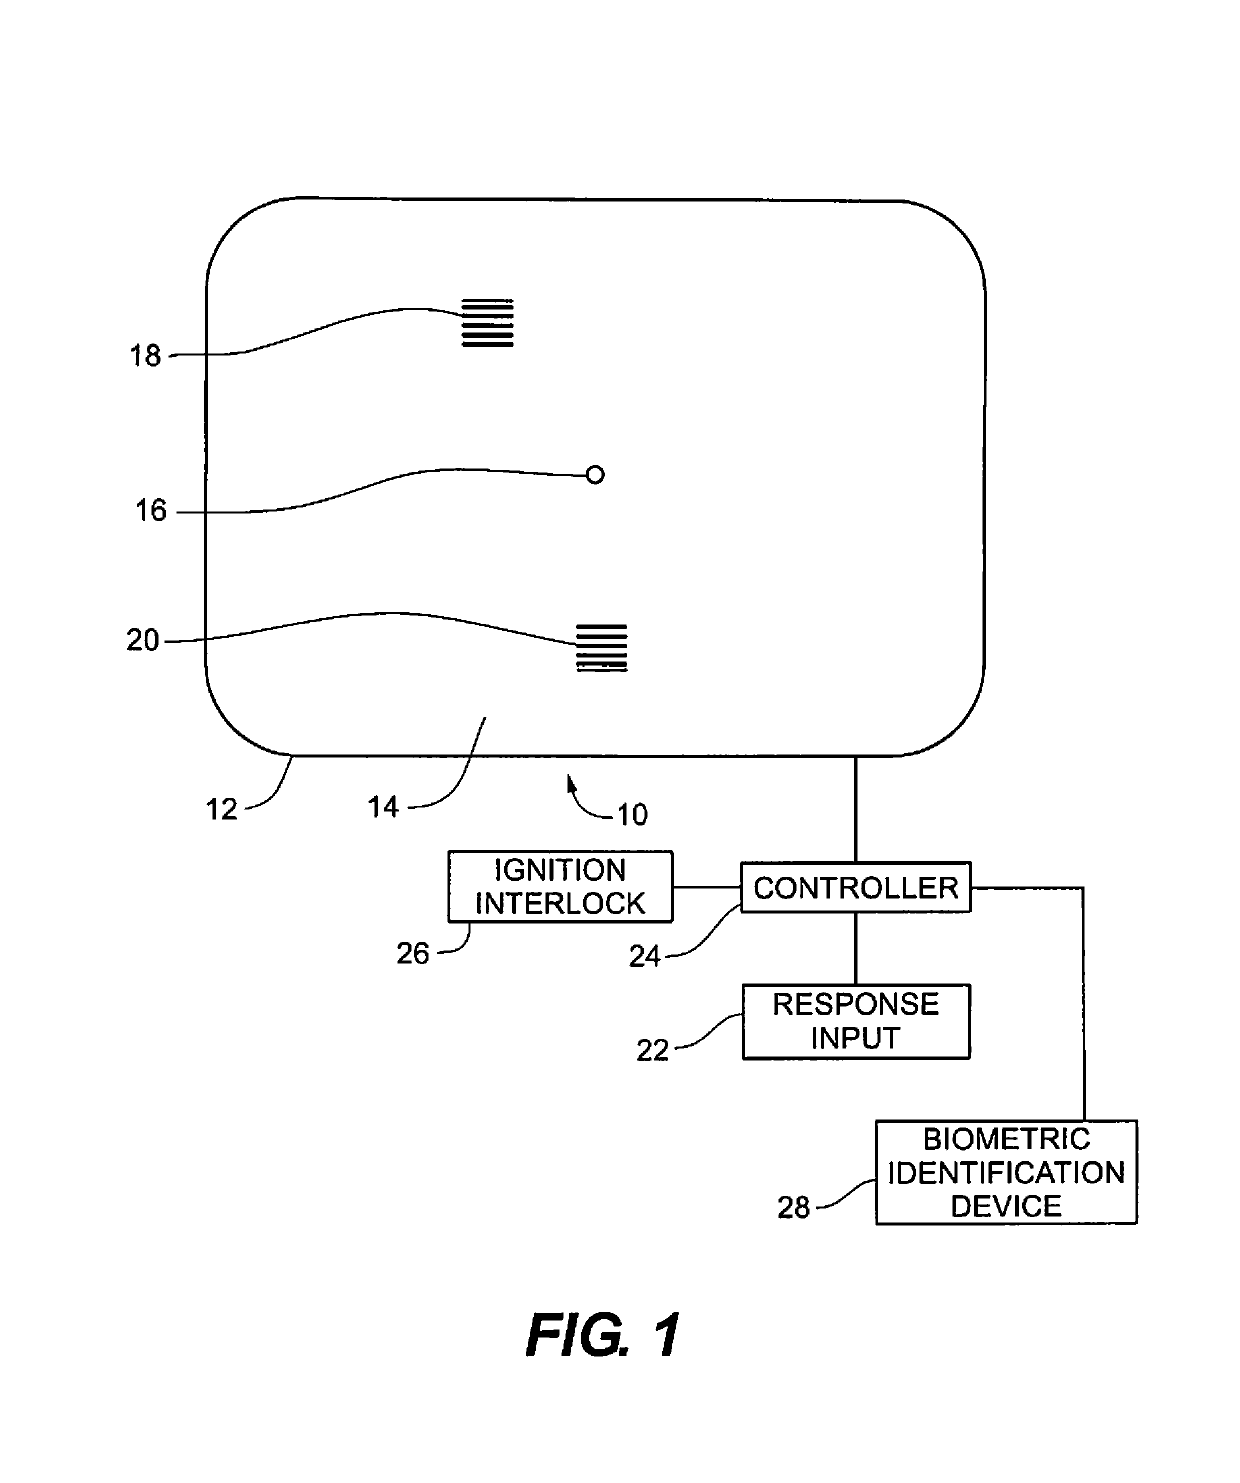 Method and device for detection and assessment of marijuana impairment